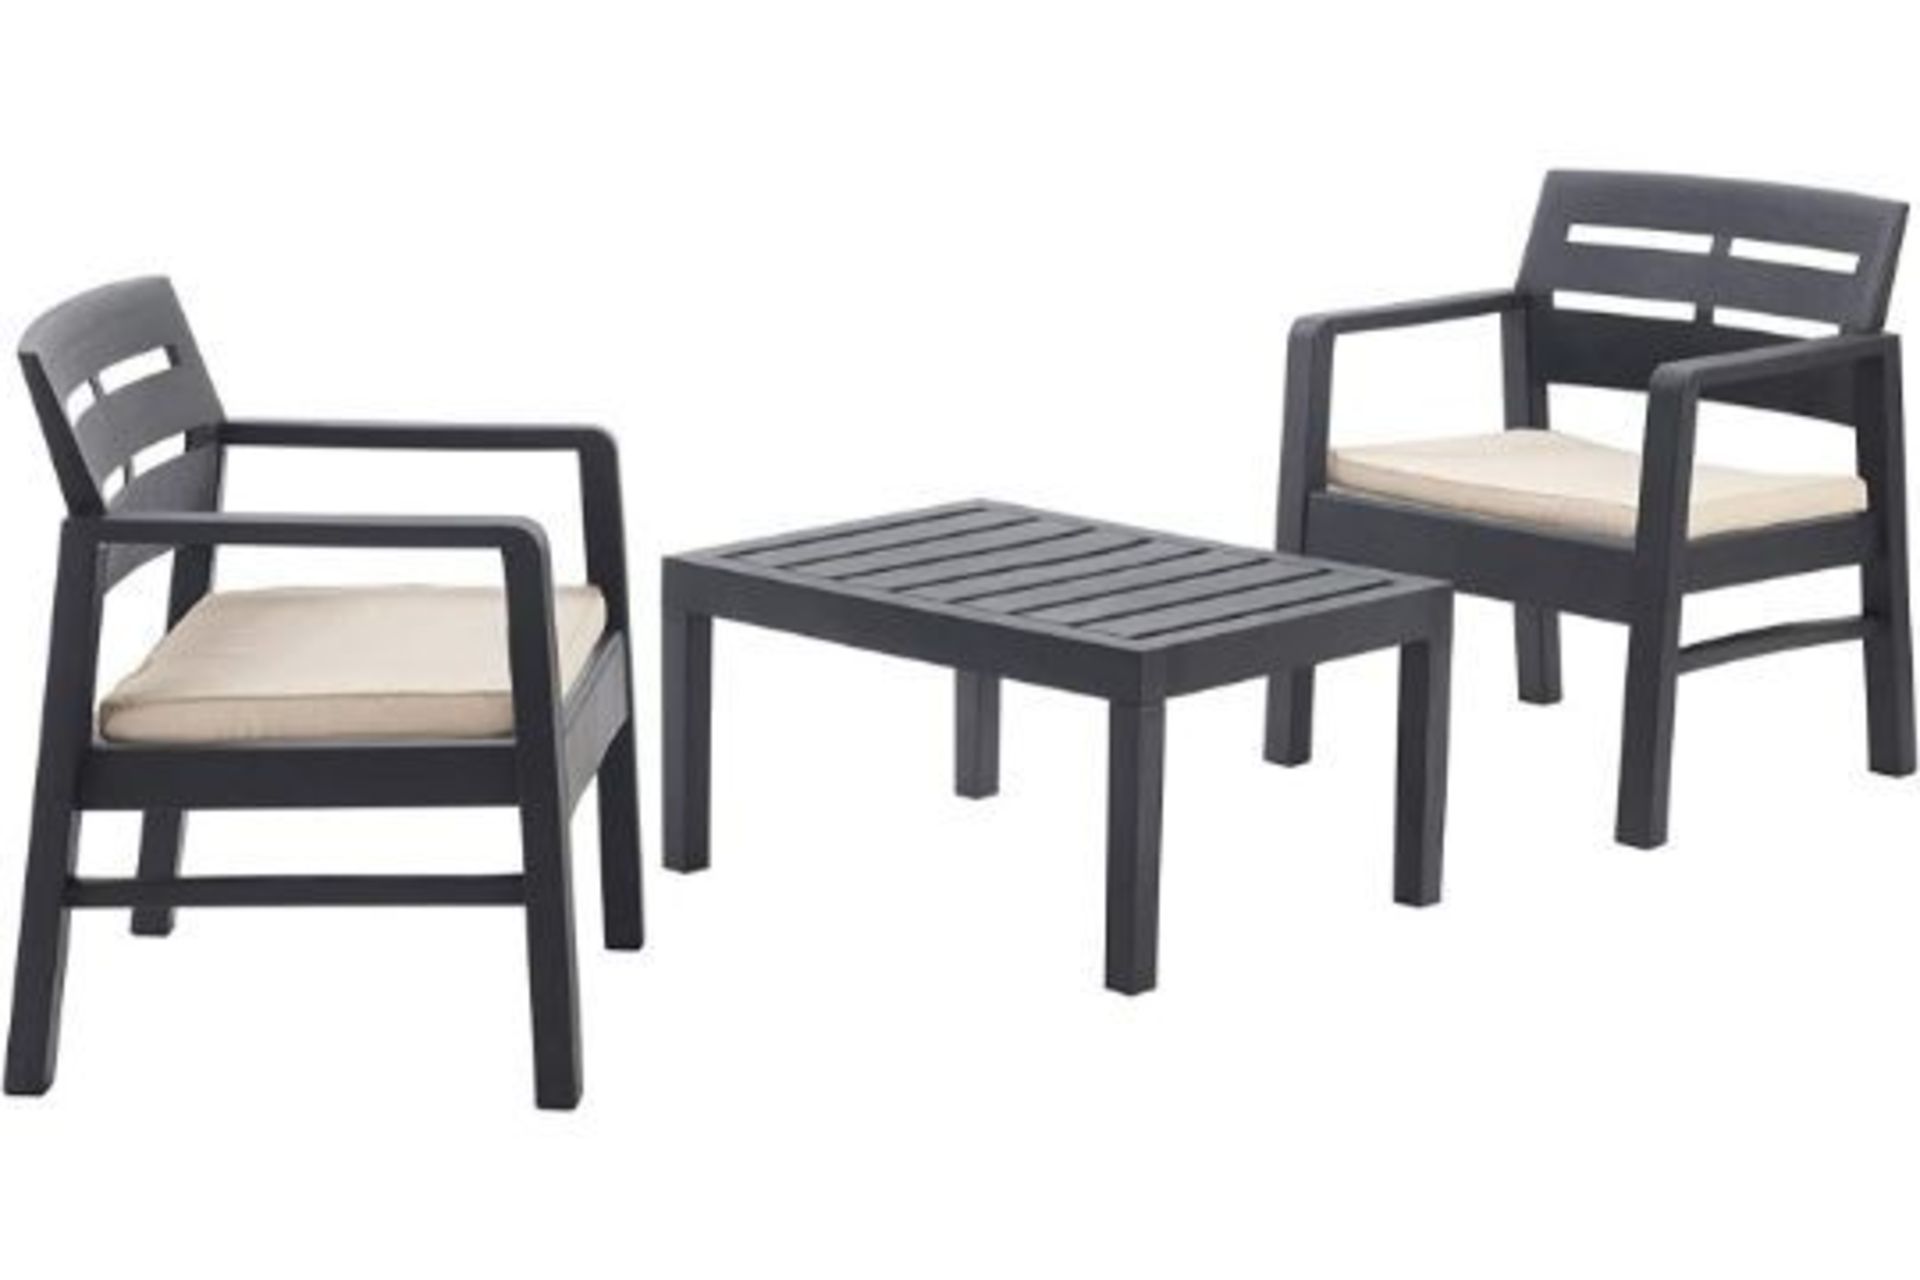 TRADE LOT TO CONTAIN 6 X BRAND NEW IPAE WOOD GRAIN EFFECT GARDEN FURNITURE SET WITH TABLE AND 2